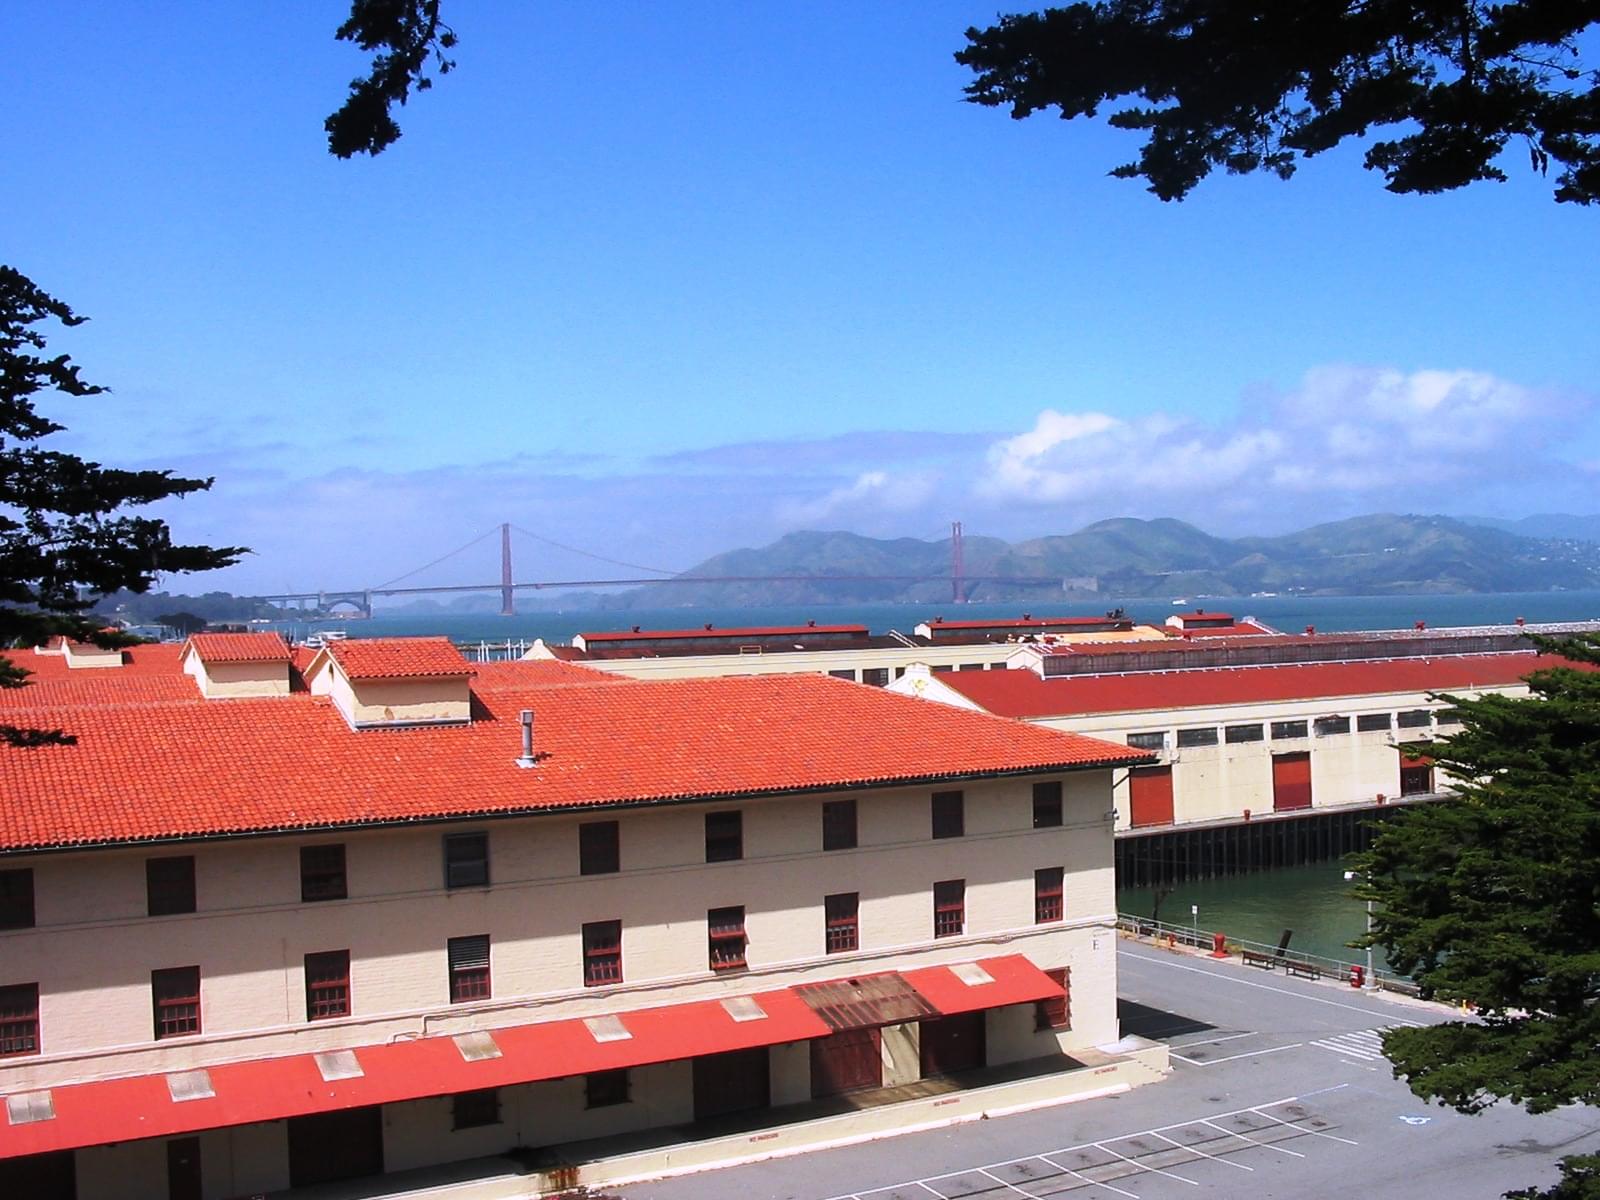 Fort Mason Overview